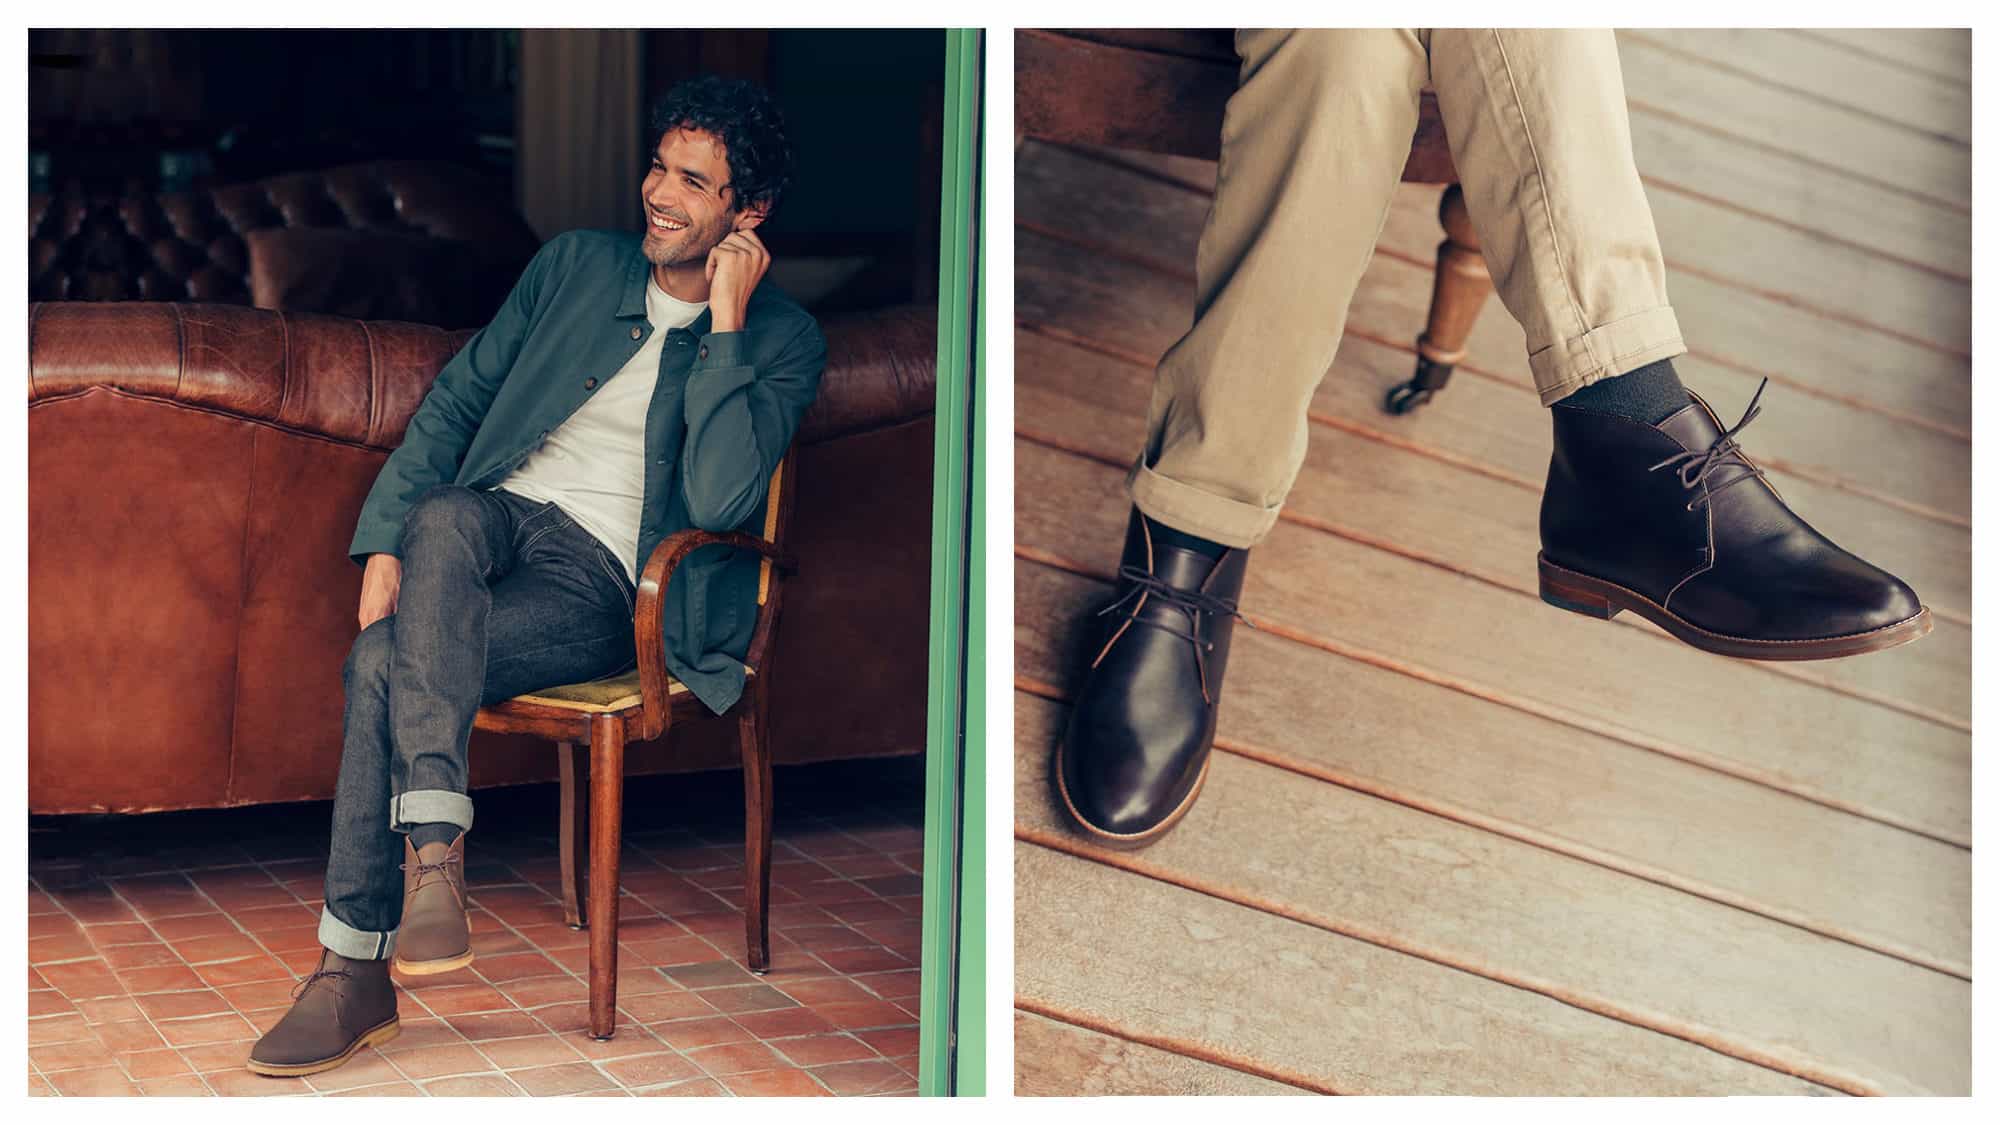 A male model sat on a wooden chair wearing a green shirt, white t-shirt, jeans and boots (left) and a shot of a man's legs and his black boots (right) from French shoe brand Pied de Biche.